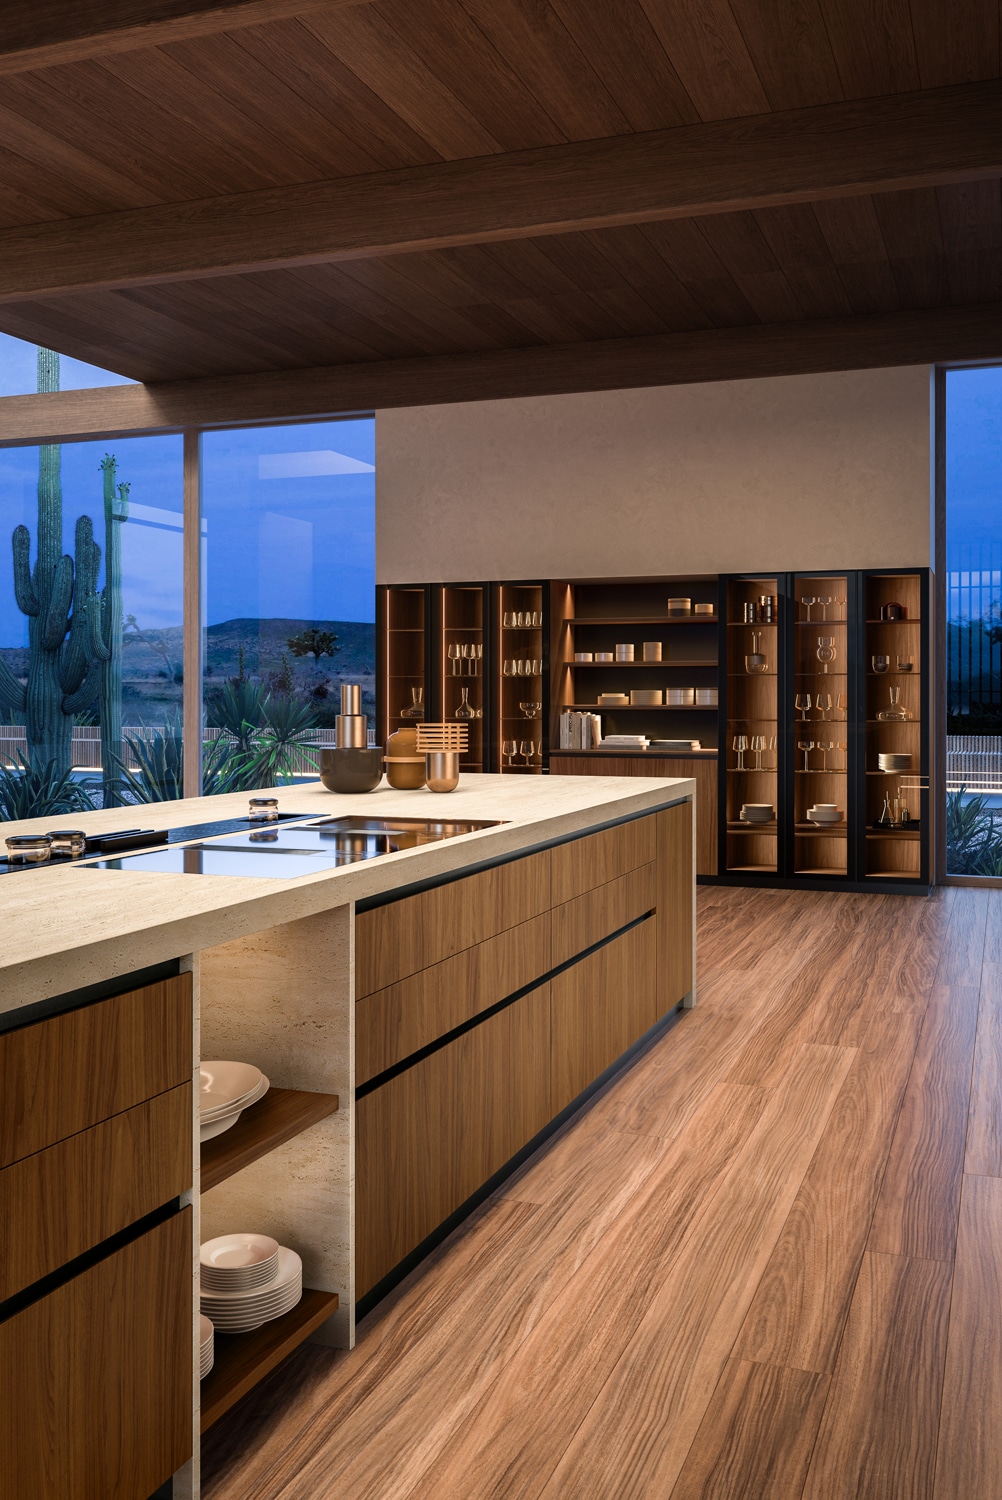 The walnut finish used on the kitchen island is mirrored by the wall unit with framed glass cabinets.